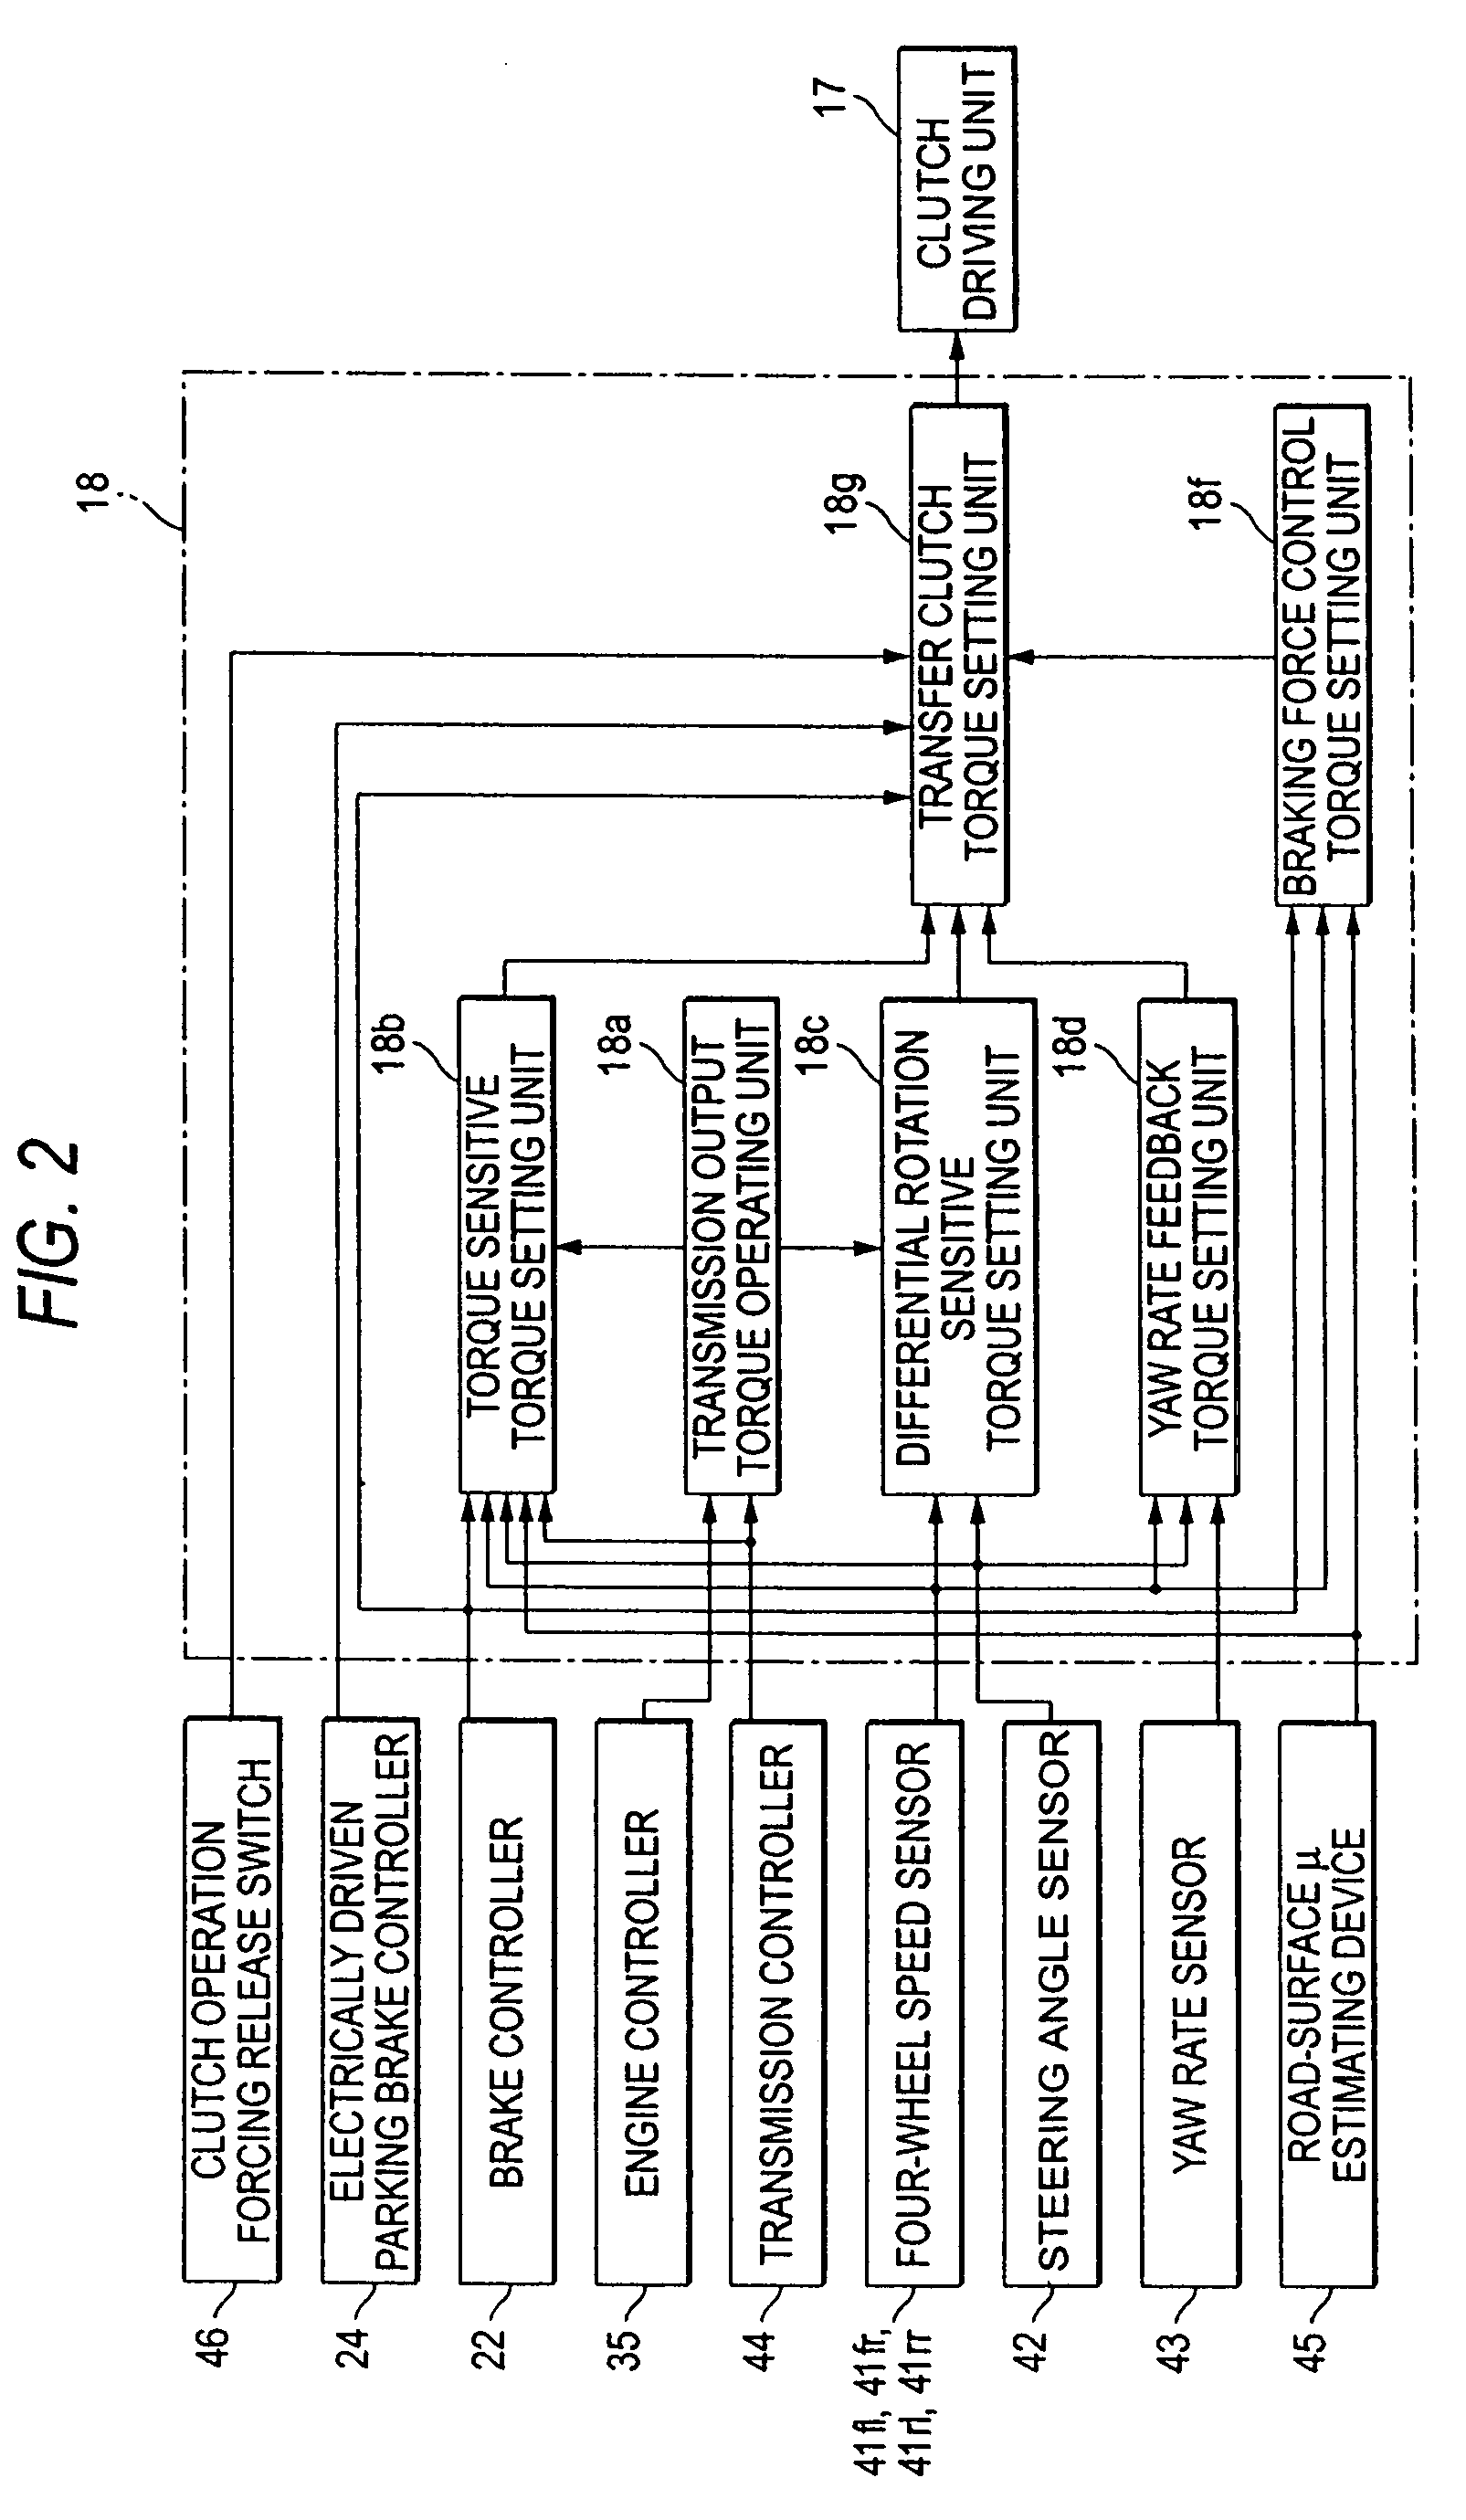 Control device for four-wheel drive vehicle